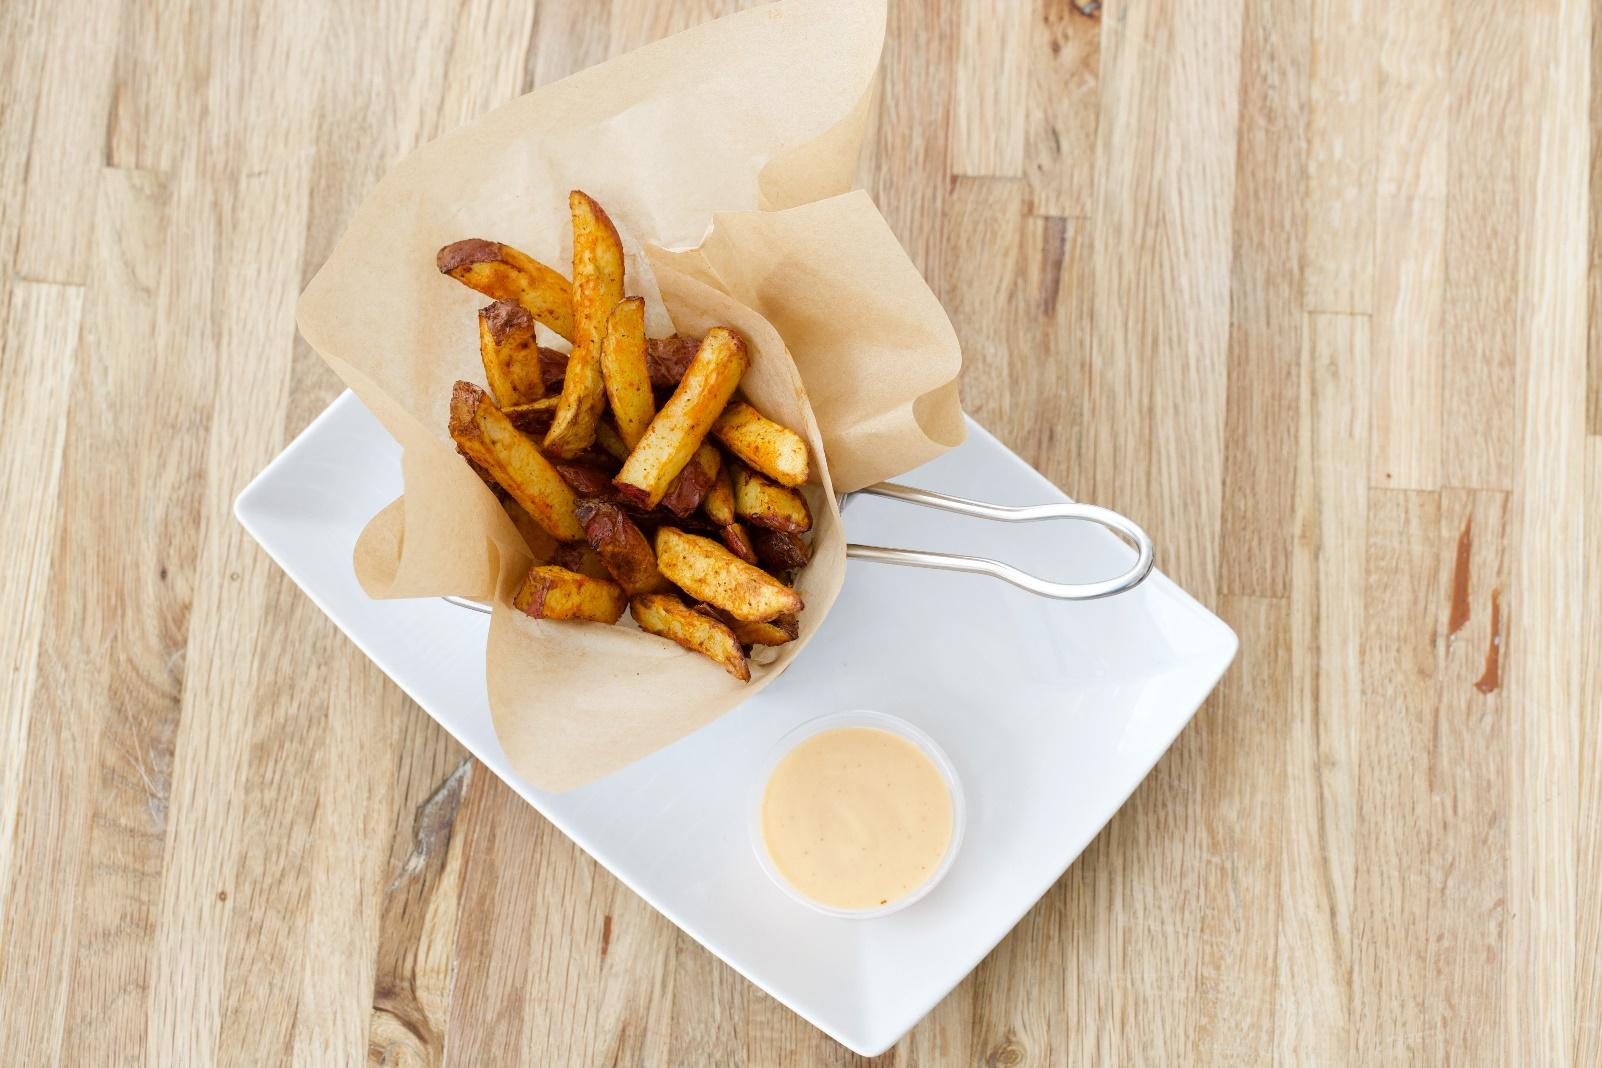 Crunch fries on a plate, The Real Food Academy baked fries recipe.